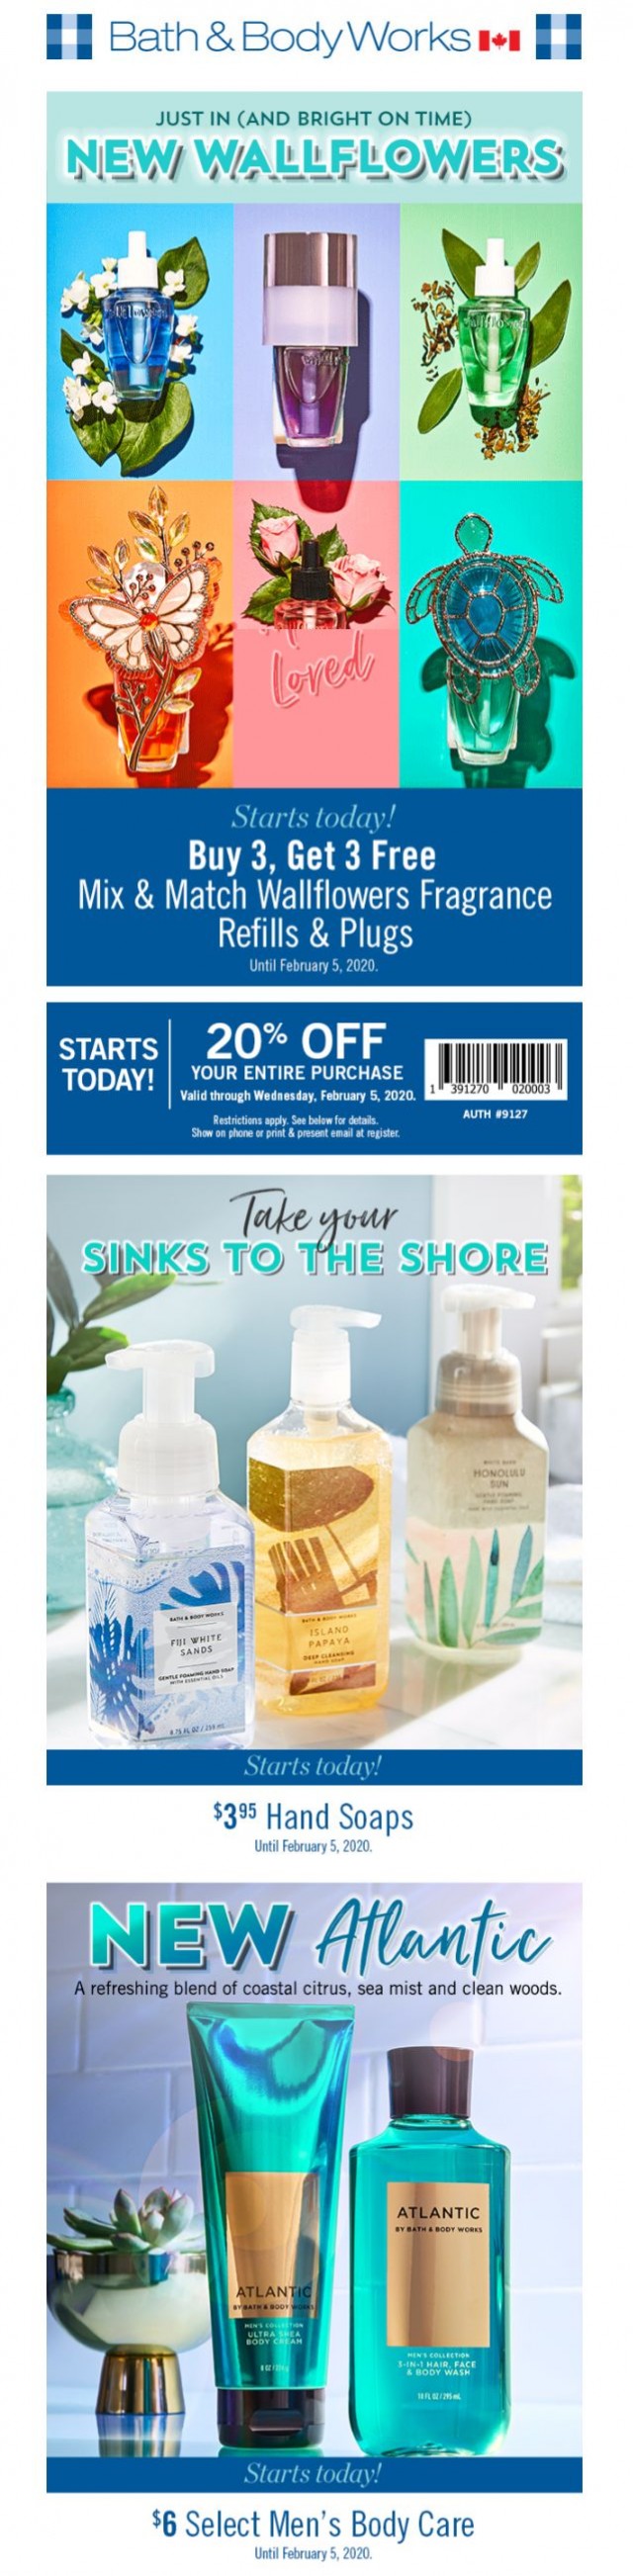 Coupon for: Bath & Body Works Canada - Calling all Wallflowers lovers! Get 3 FREE NOW!